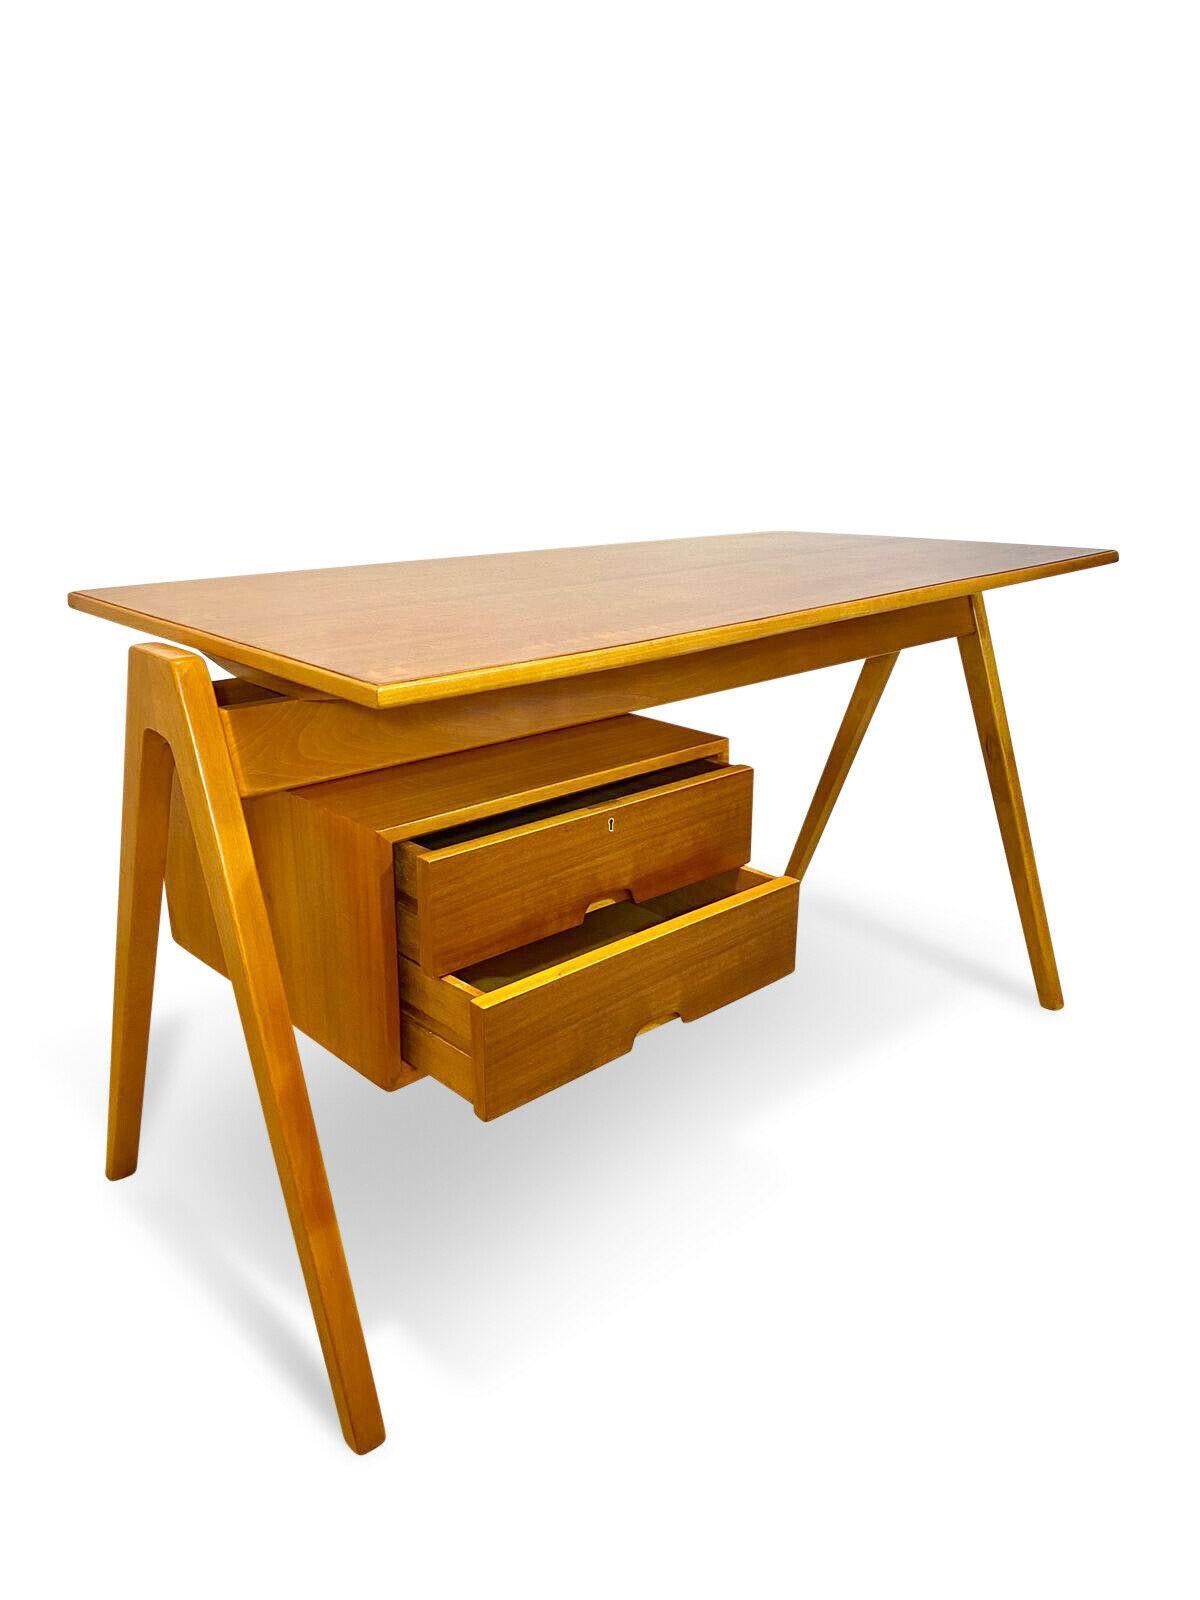 Rare Hillestak desk designed by Robin day for Hille London, 1950s. Beautifully contrasting cherry wood top and drawer fronts with a beech frame and legs, 1969.